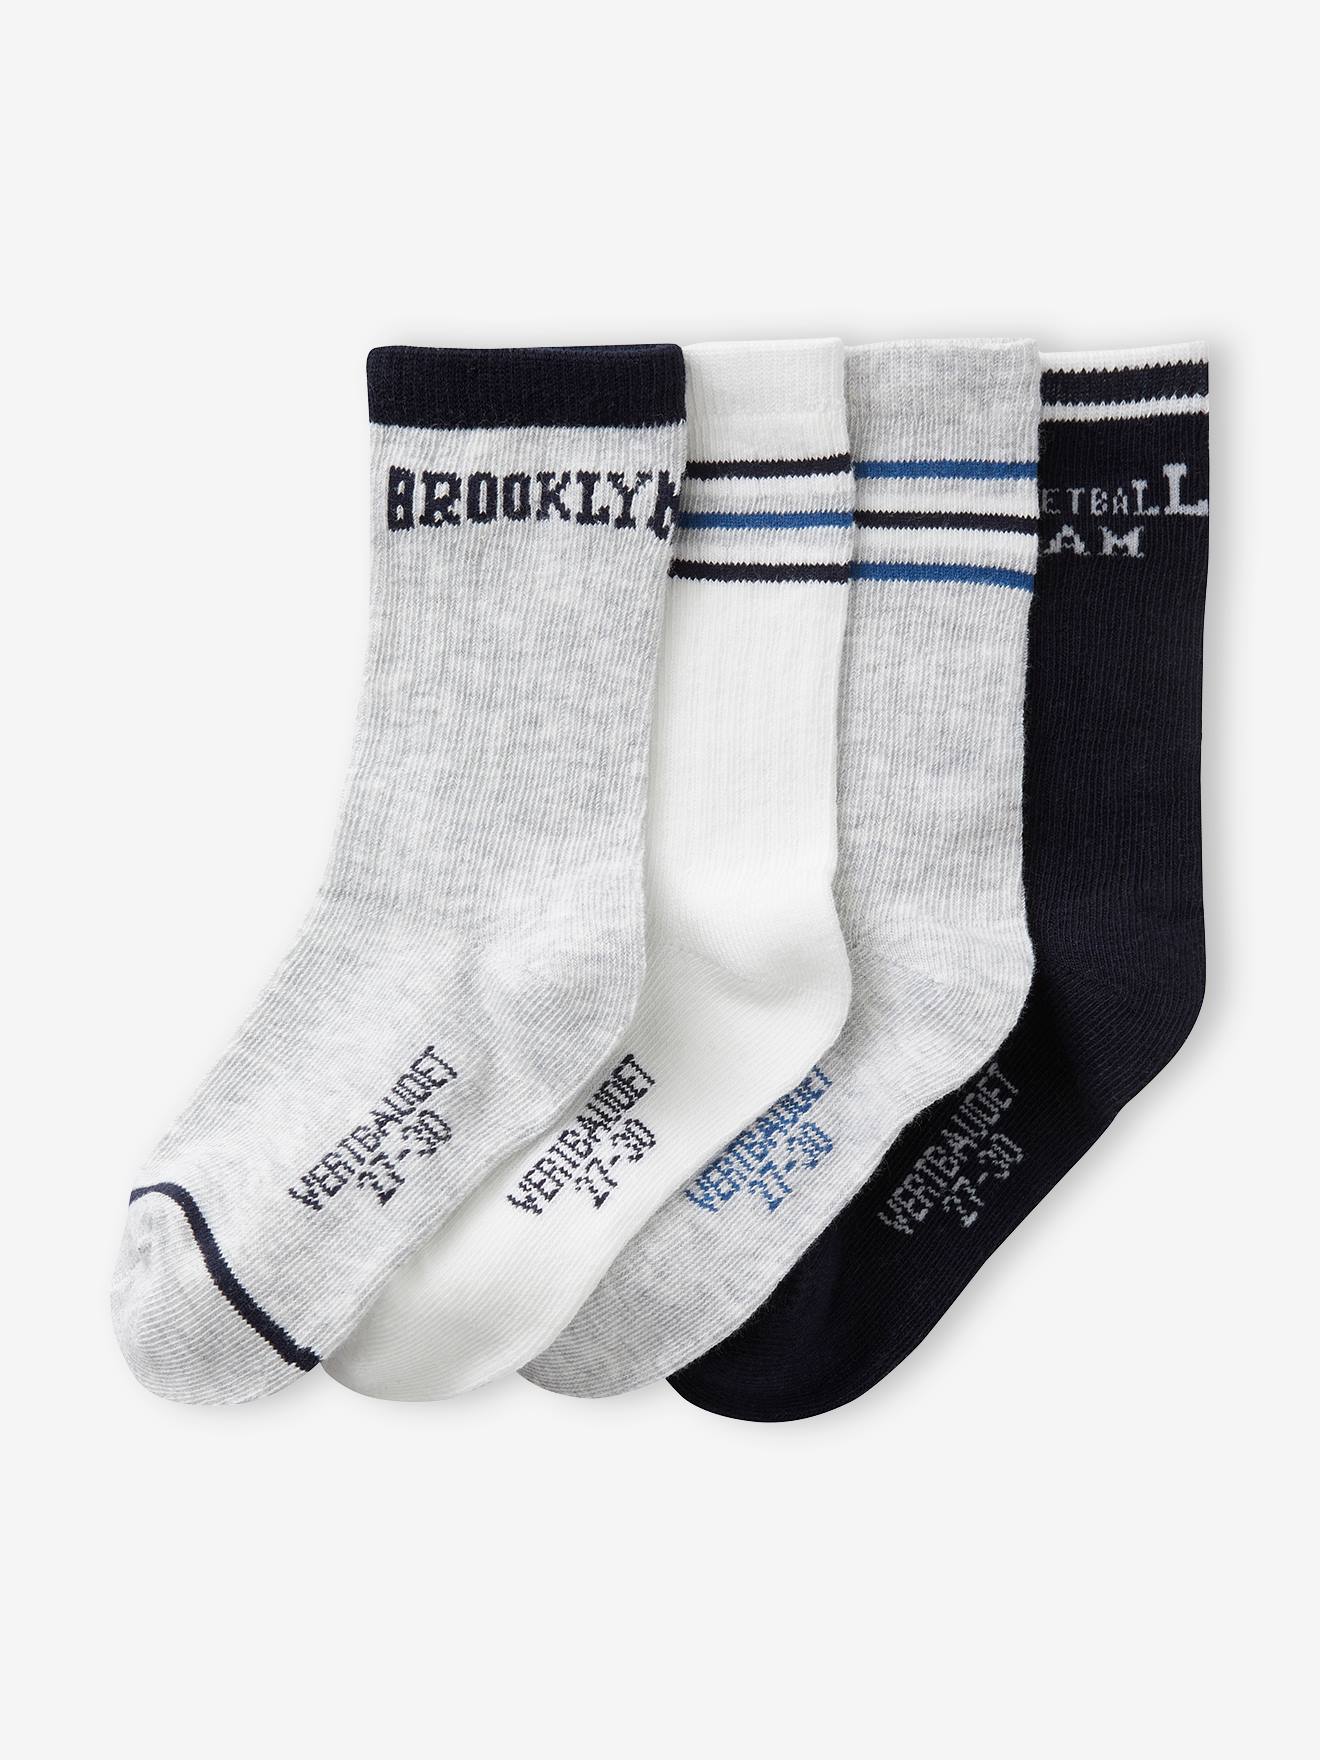 Pack of 5 Pairs of Sports Socks for Boys - grey